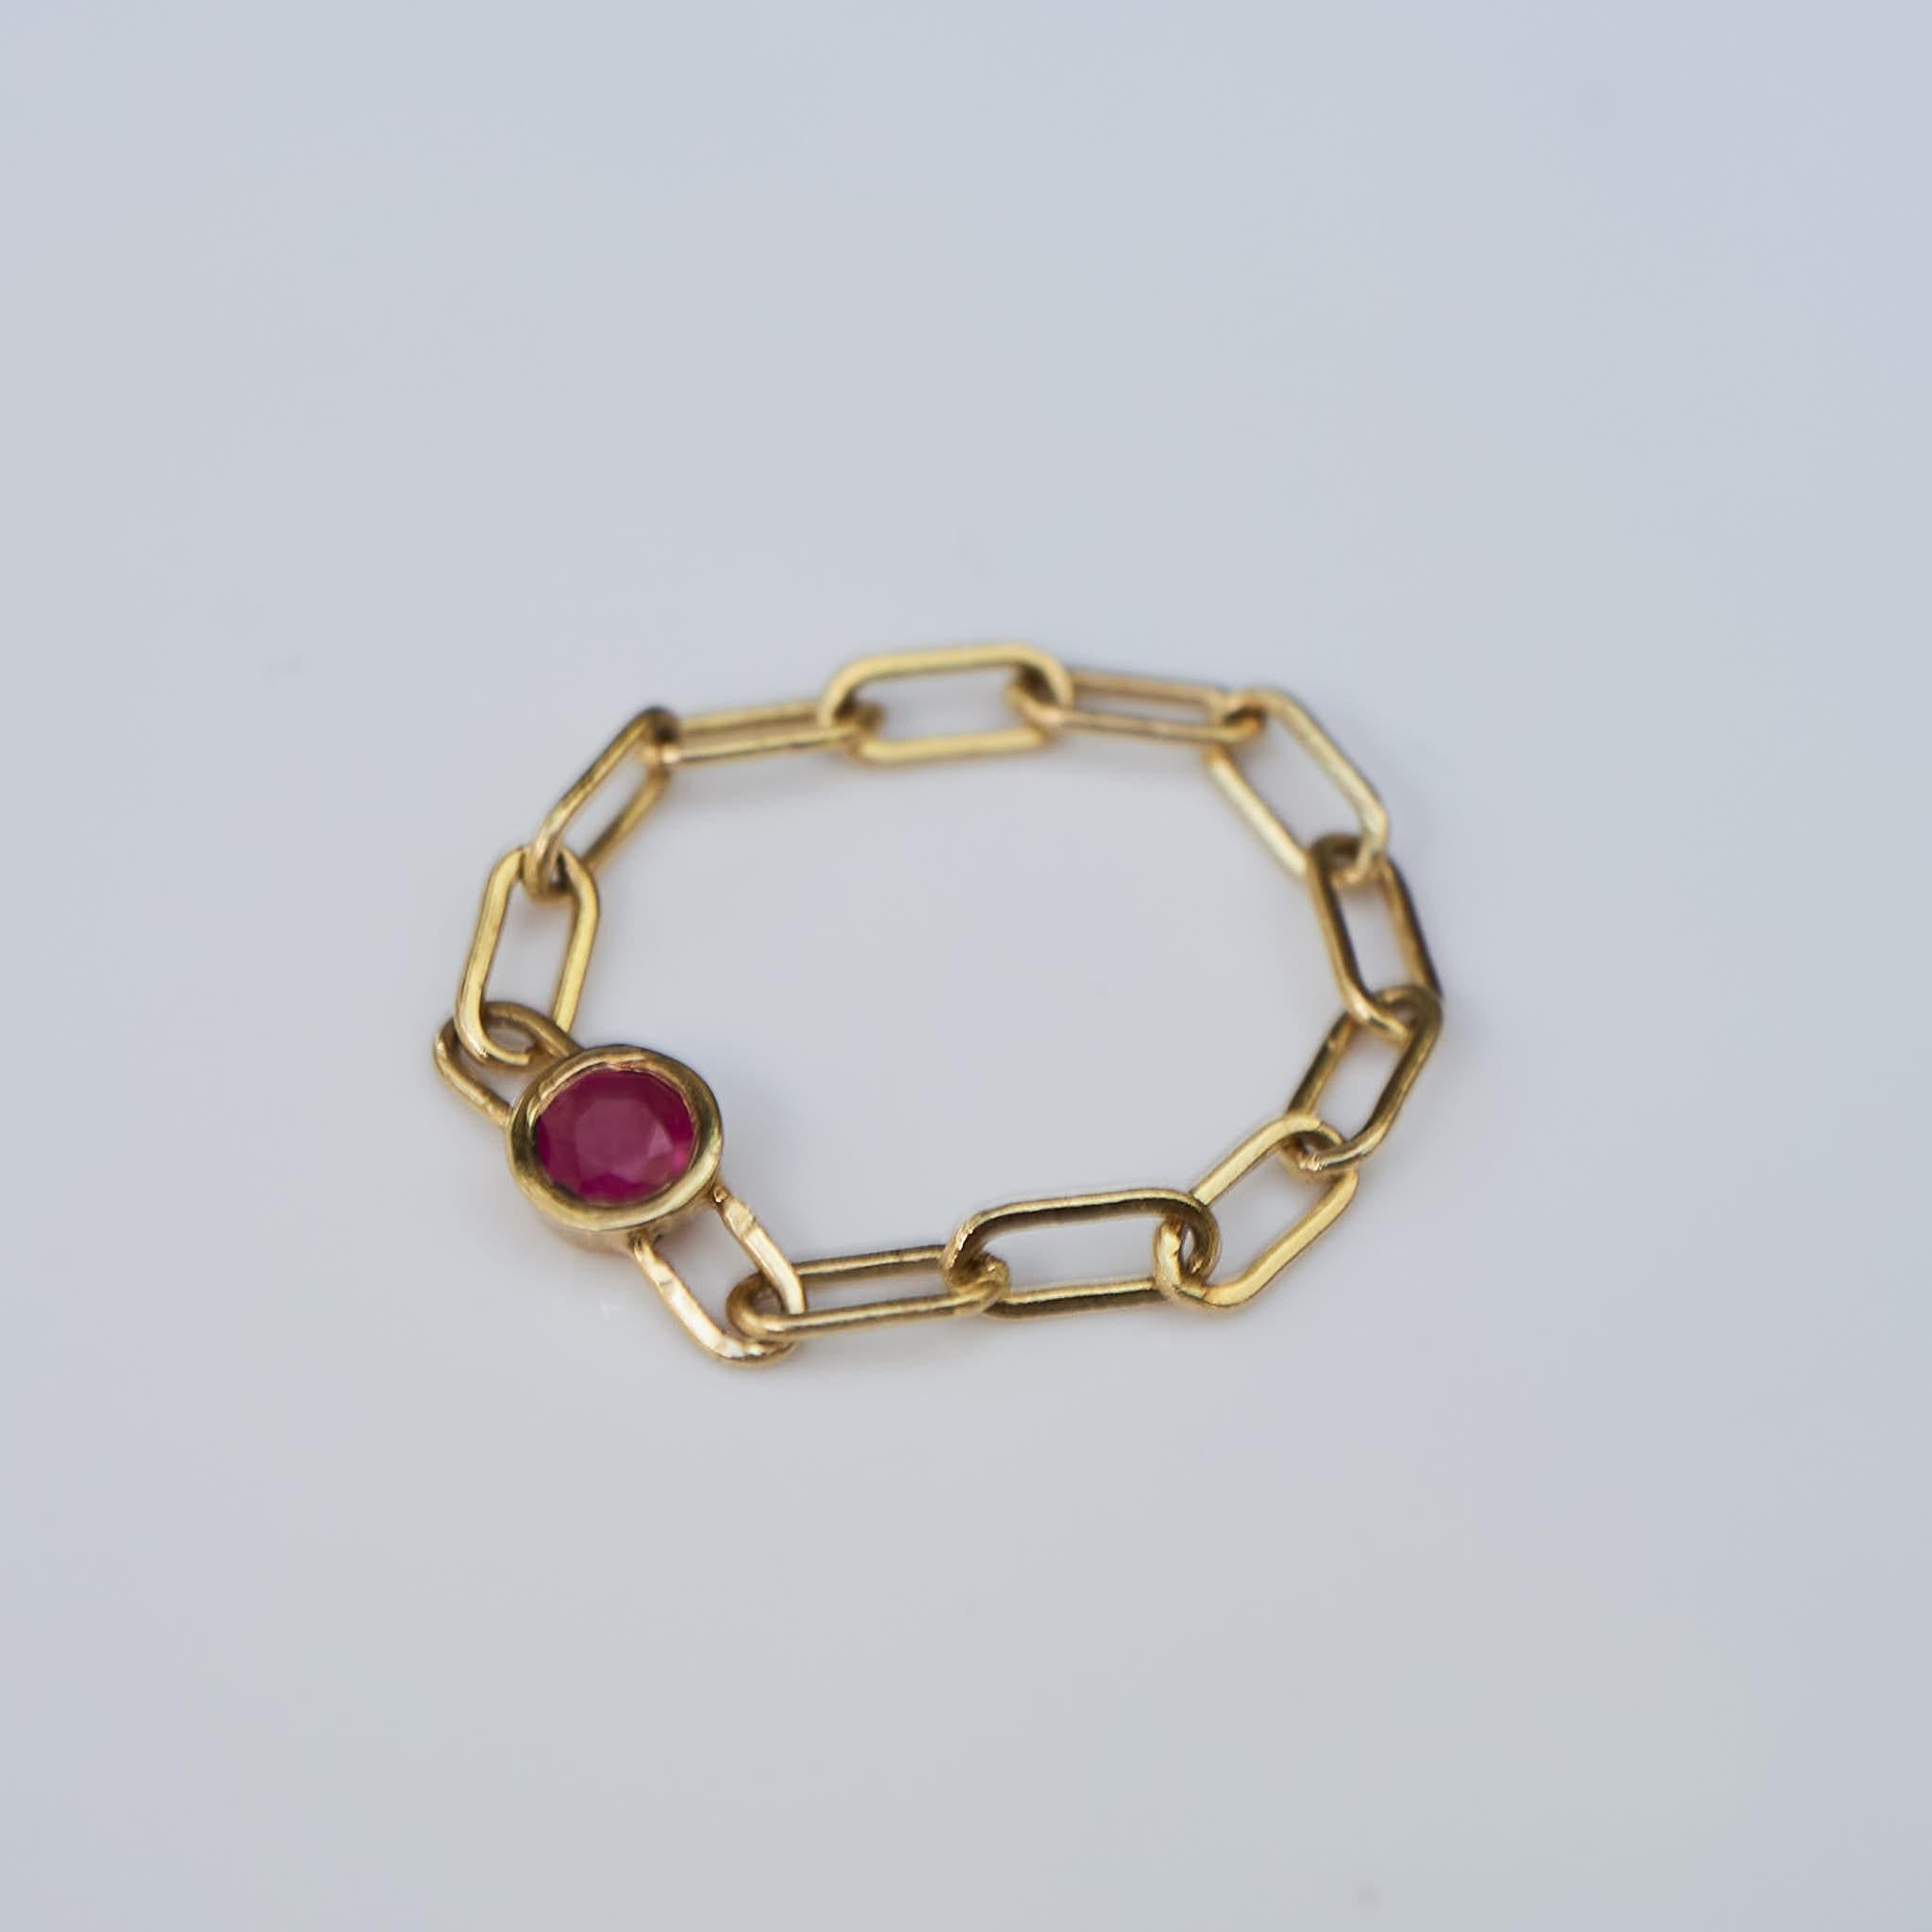 Gold Chain Ring Pink Tourmaline 14K Stack Ring  J Dauphin

Made in Los Angeles

Available for immediate delivery

Can be custom made in any size, with various gems: Sapphire, Diamond, ruby or opal. last 4 Images show different options of gem and size